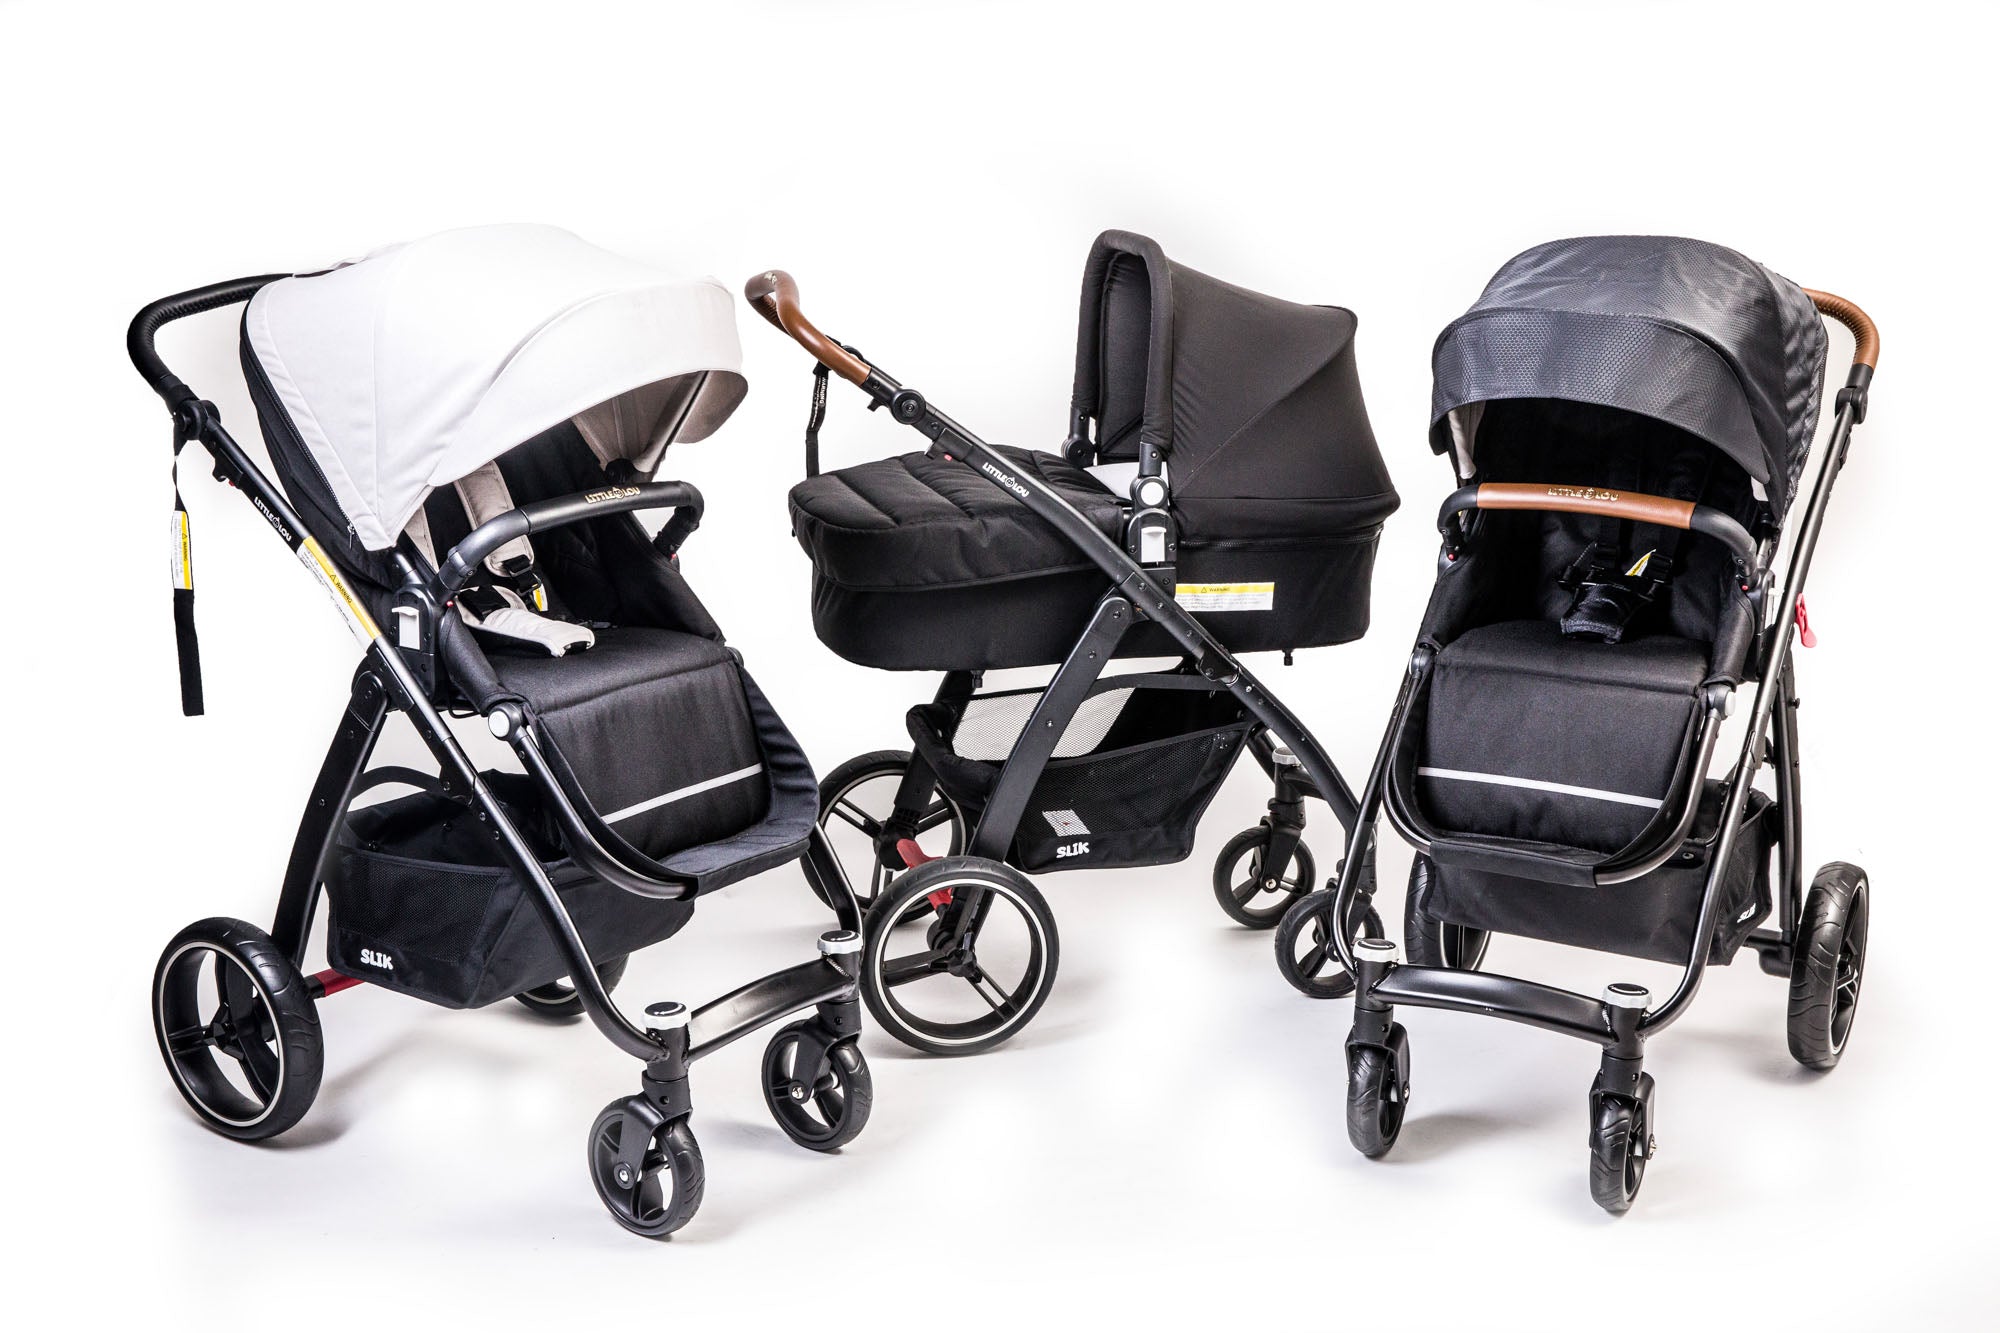 Pram, Stroller, Buggy, Are They All The Same?